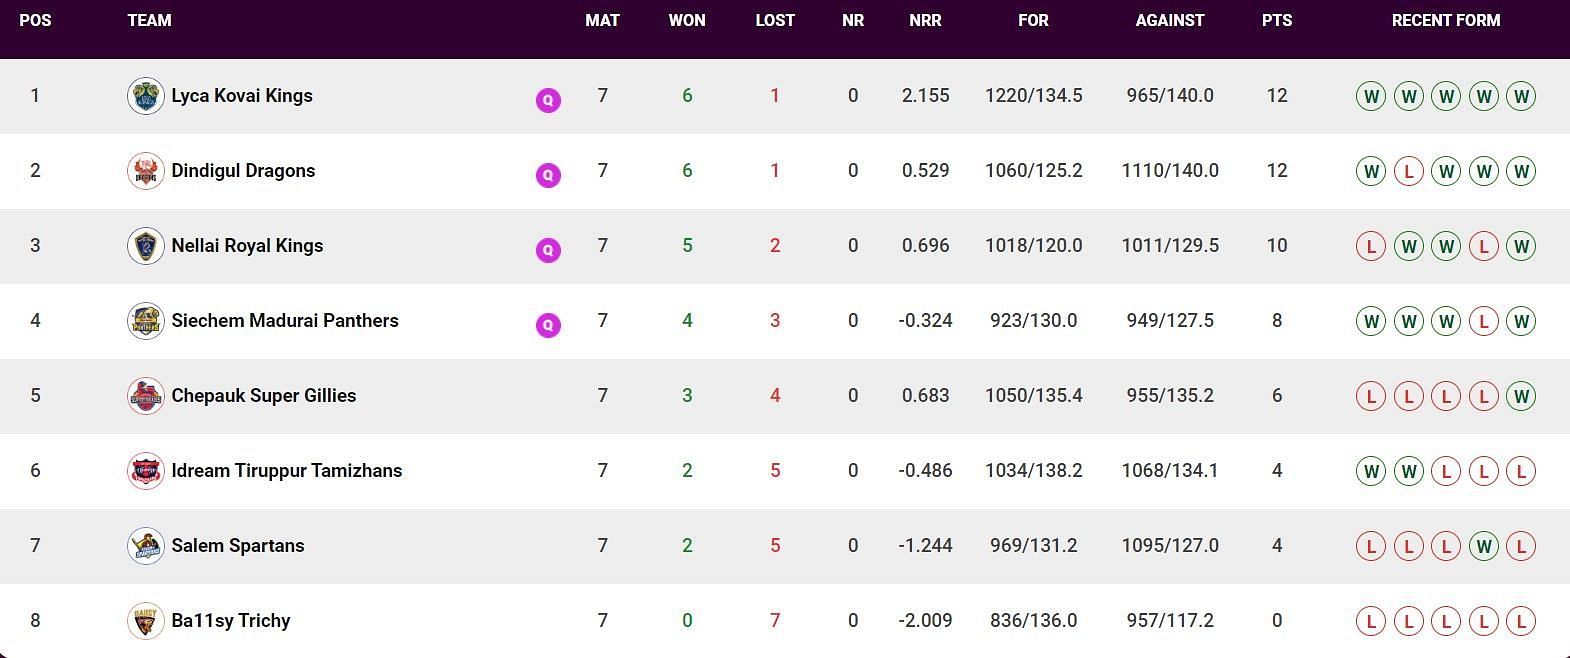 Updated Points Table after Match 28 (Image Courtesy: www.tnpl.com)